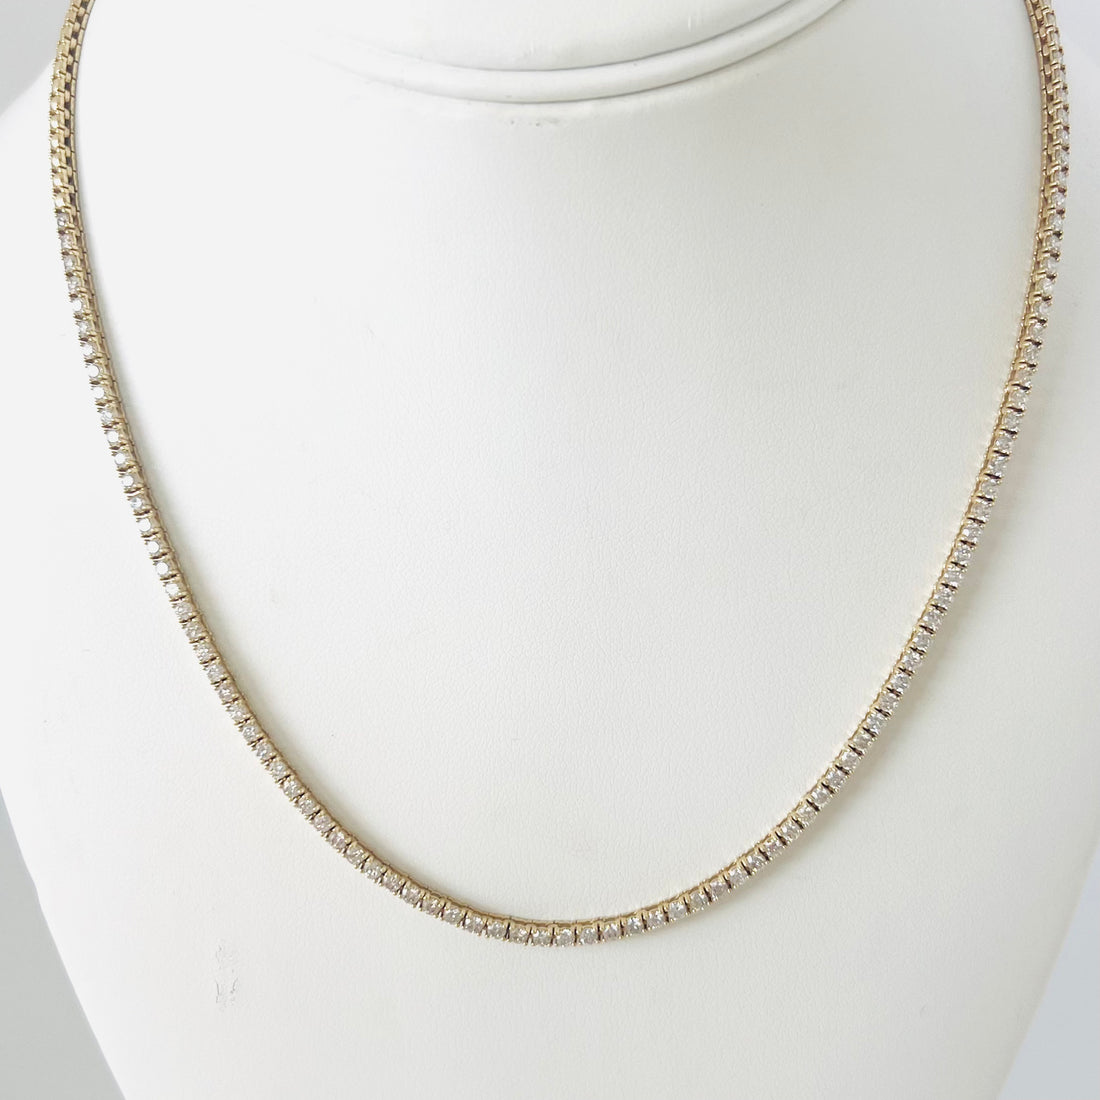 14k gold and diamond tennis necklace